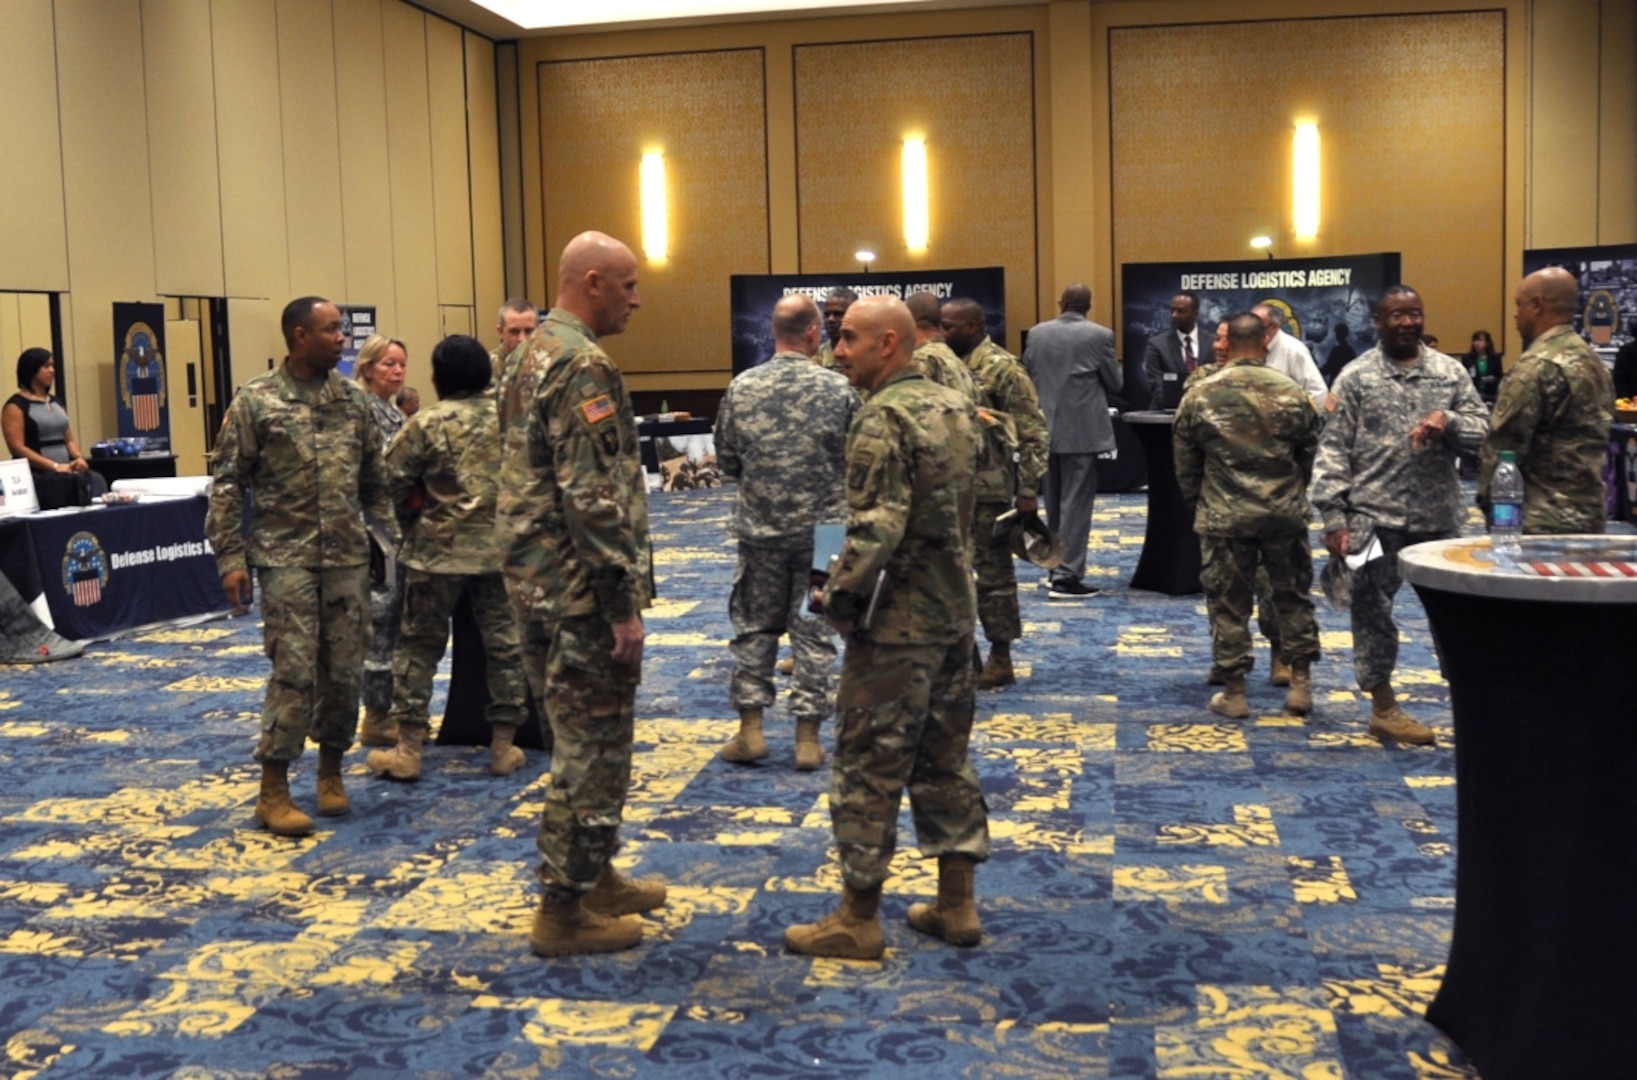 Attendees at the DLA Warfighter Support Initiative gather before a morning breakout session at Fort Bragg, North Carolina, March 23.